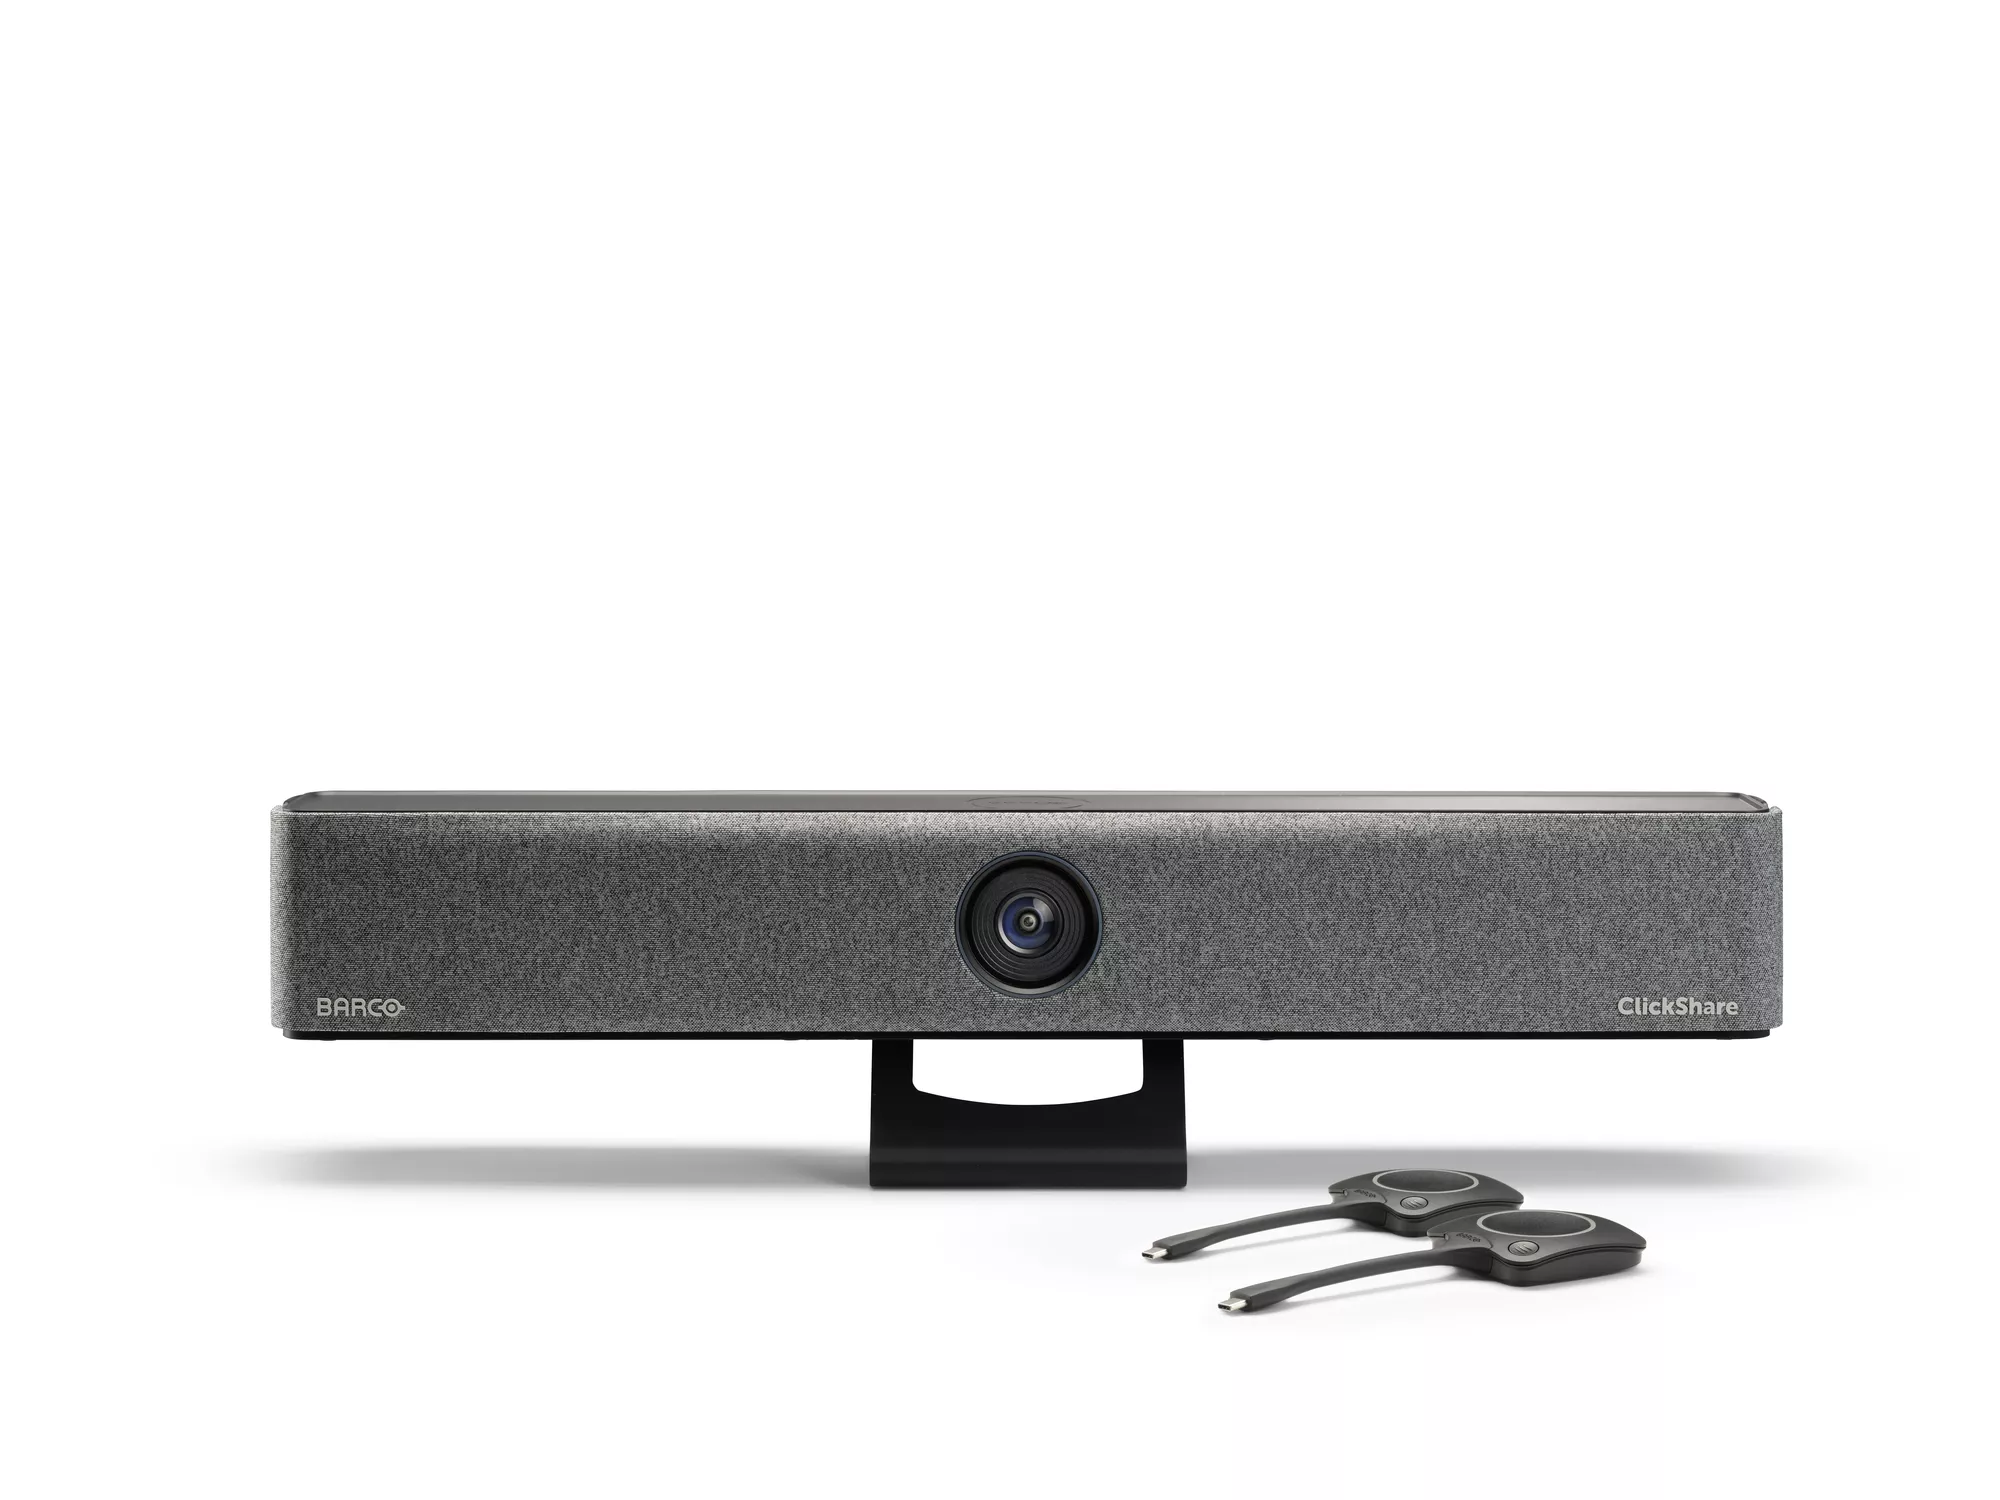 Barco ClickShare Bar Pro - All-in-one video conferencing soundbar with 2 buttons - medium-sized rooms